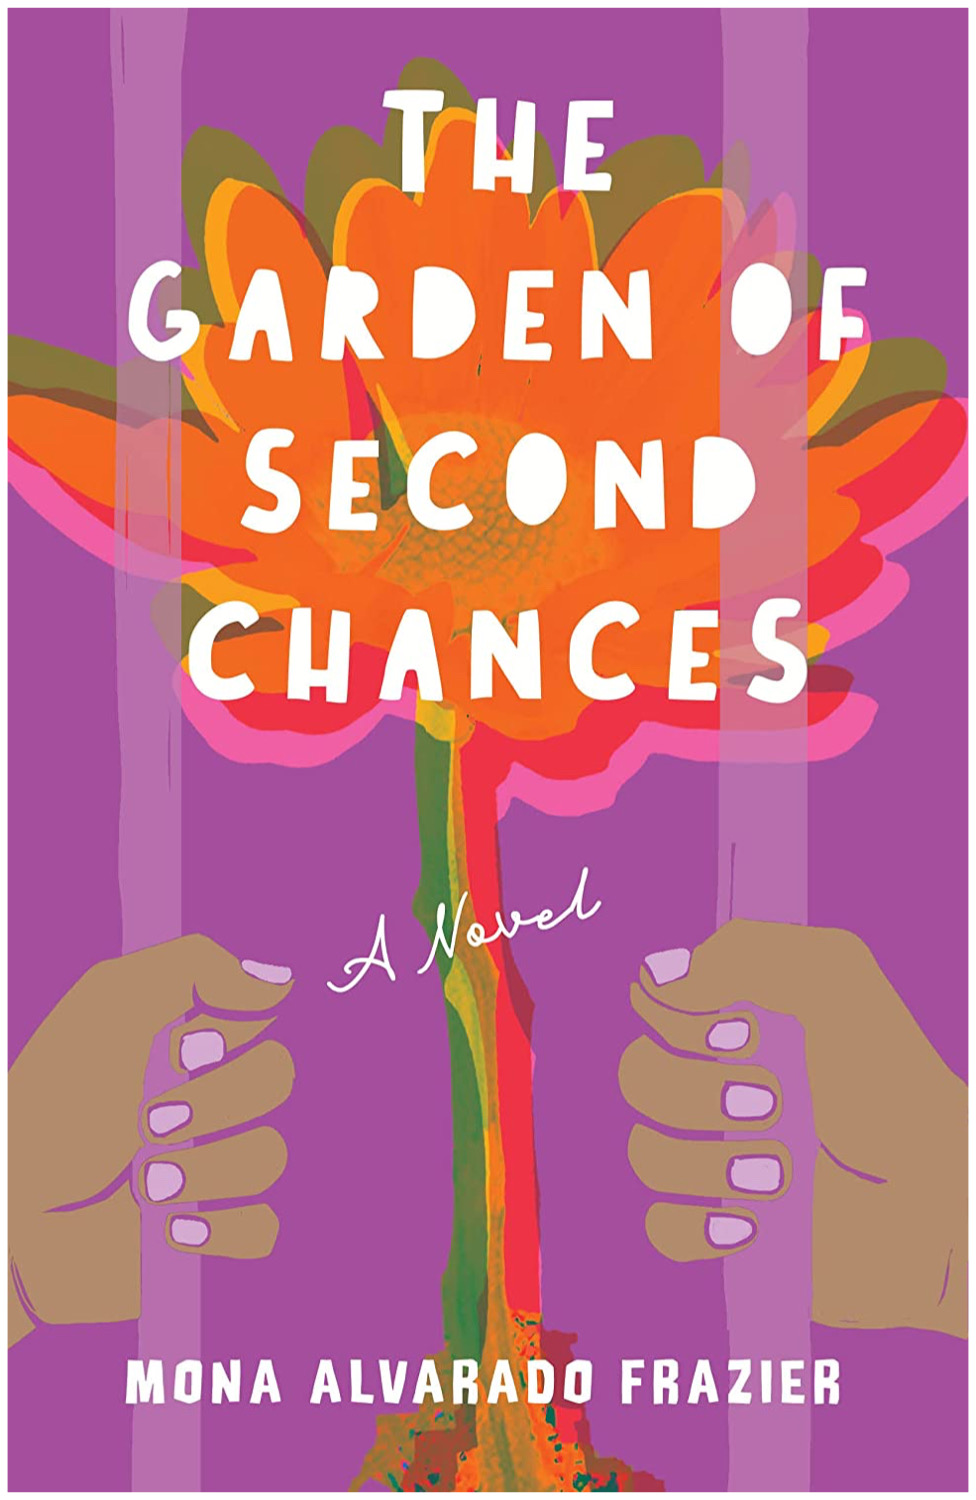 purple book cover with an orange and yellow daisy in background, two hands on prison bars in foreground